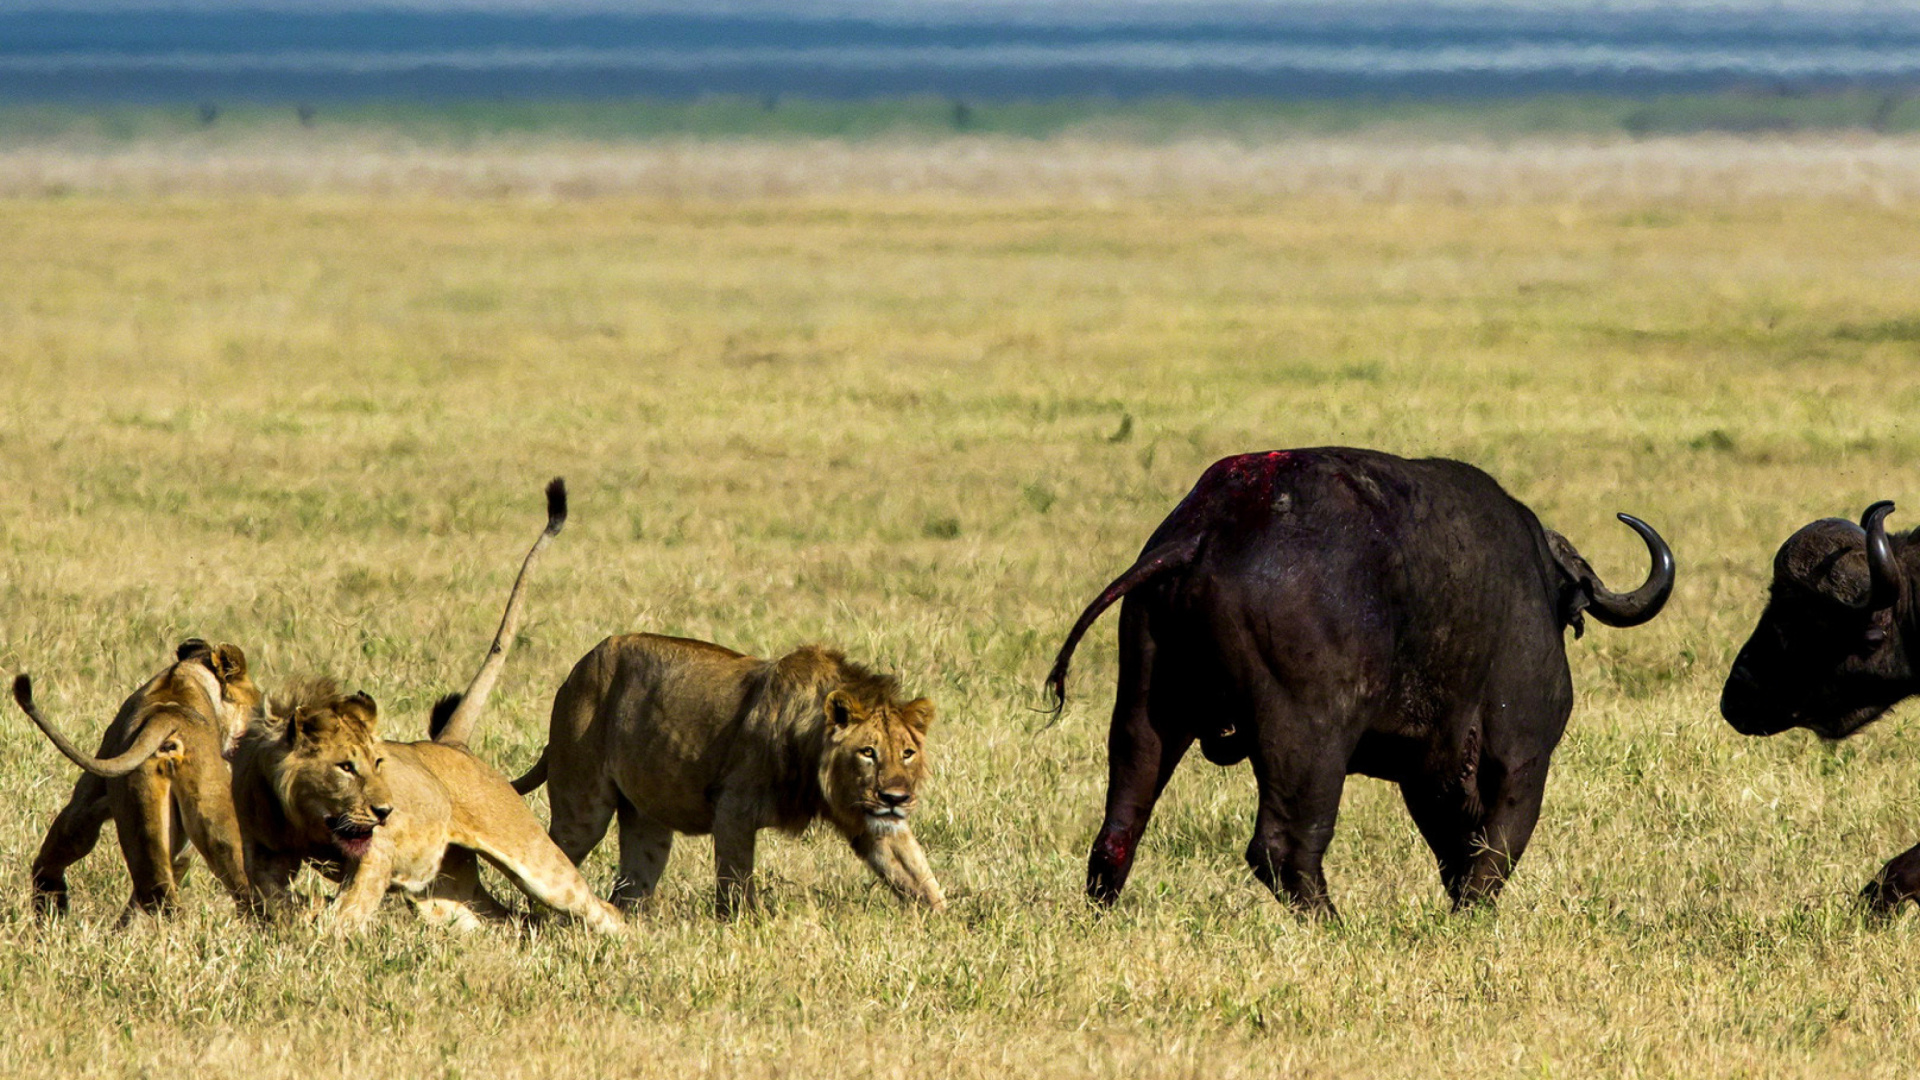 Das Lions and Buffaloes Wallpaper 1920x1080